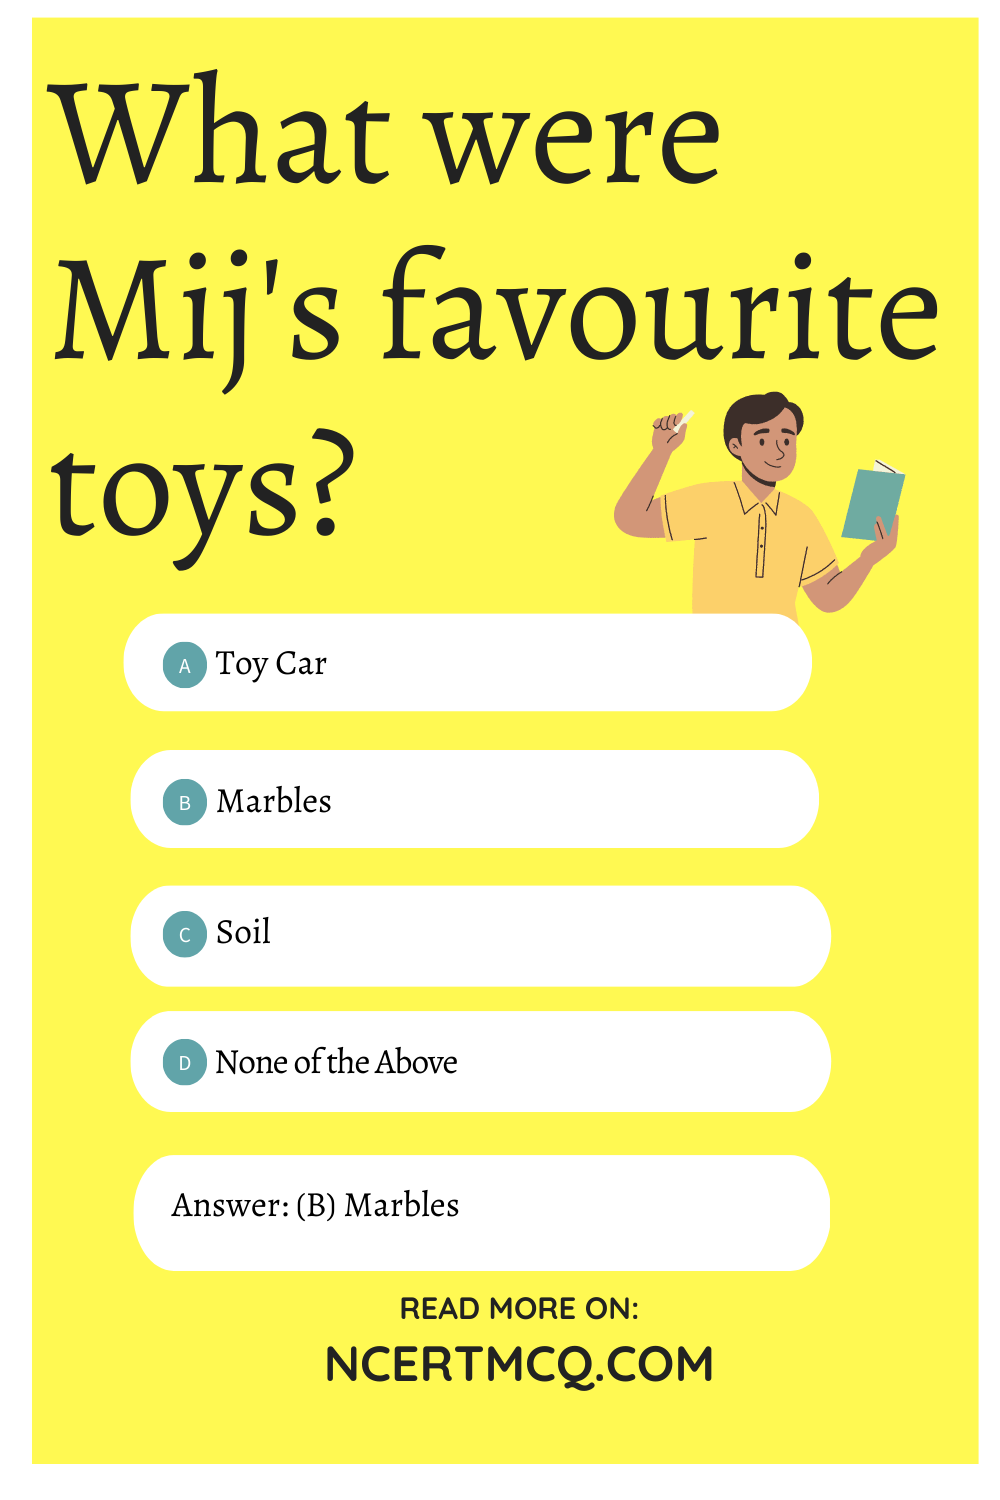 What were Mij's favourite toys?